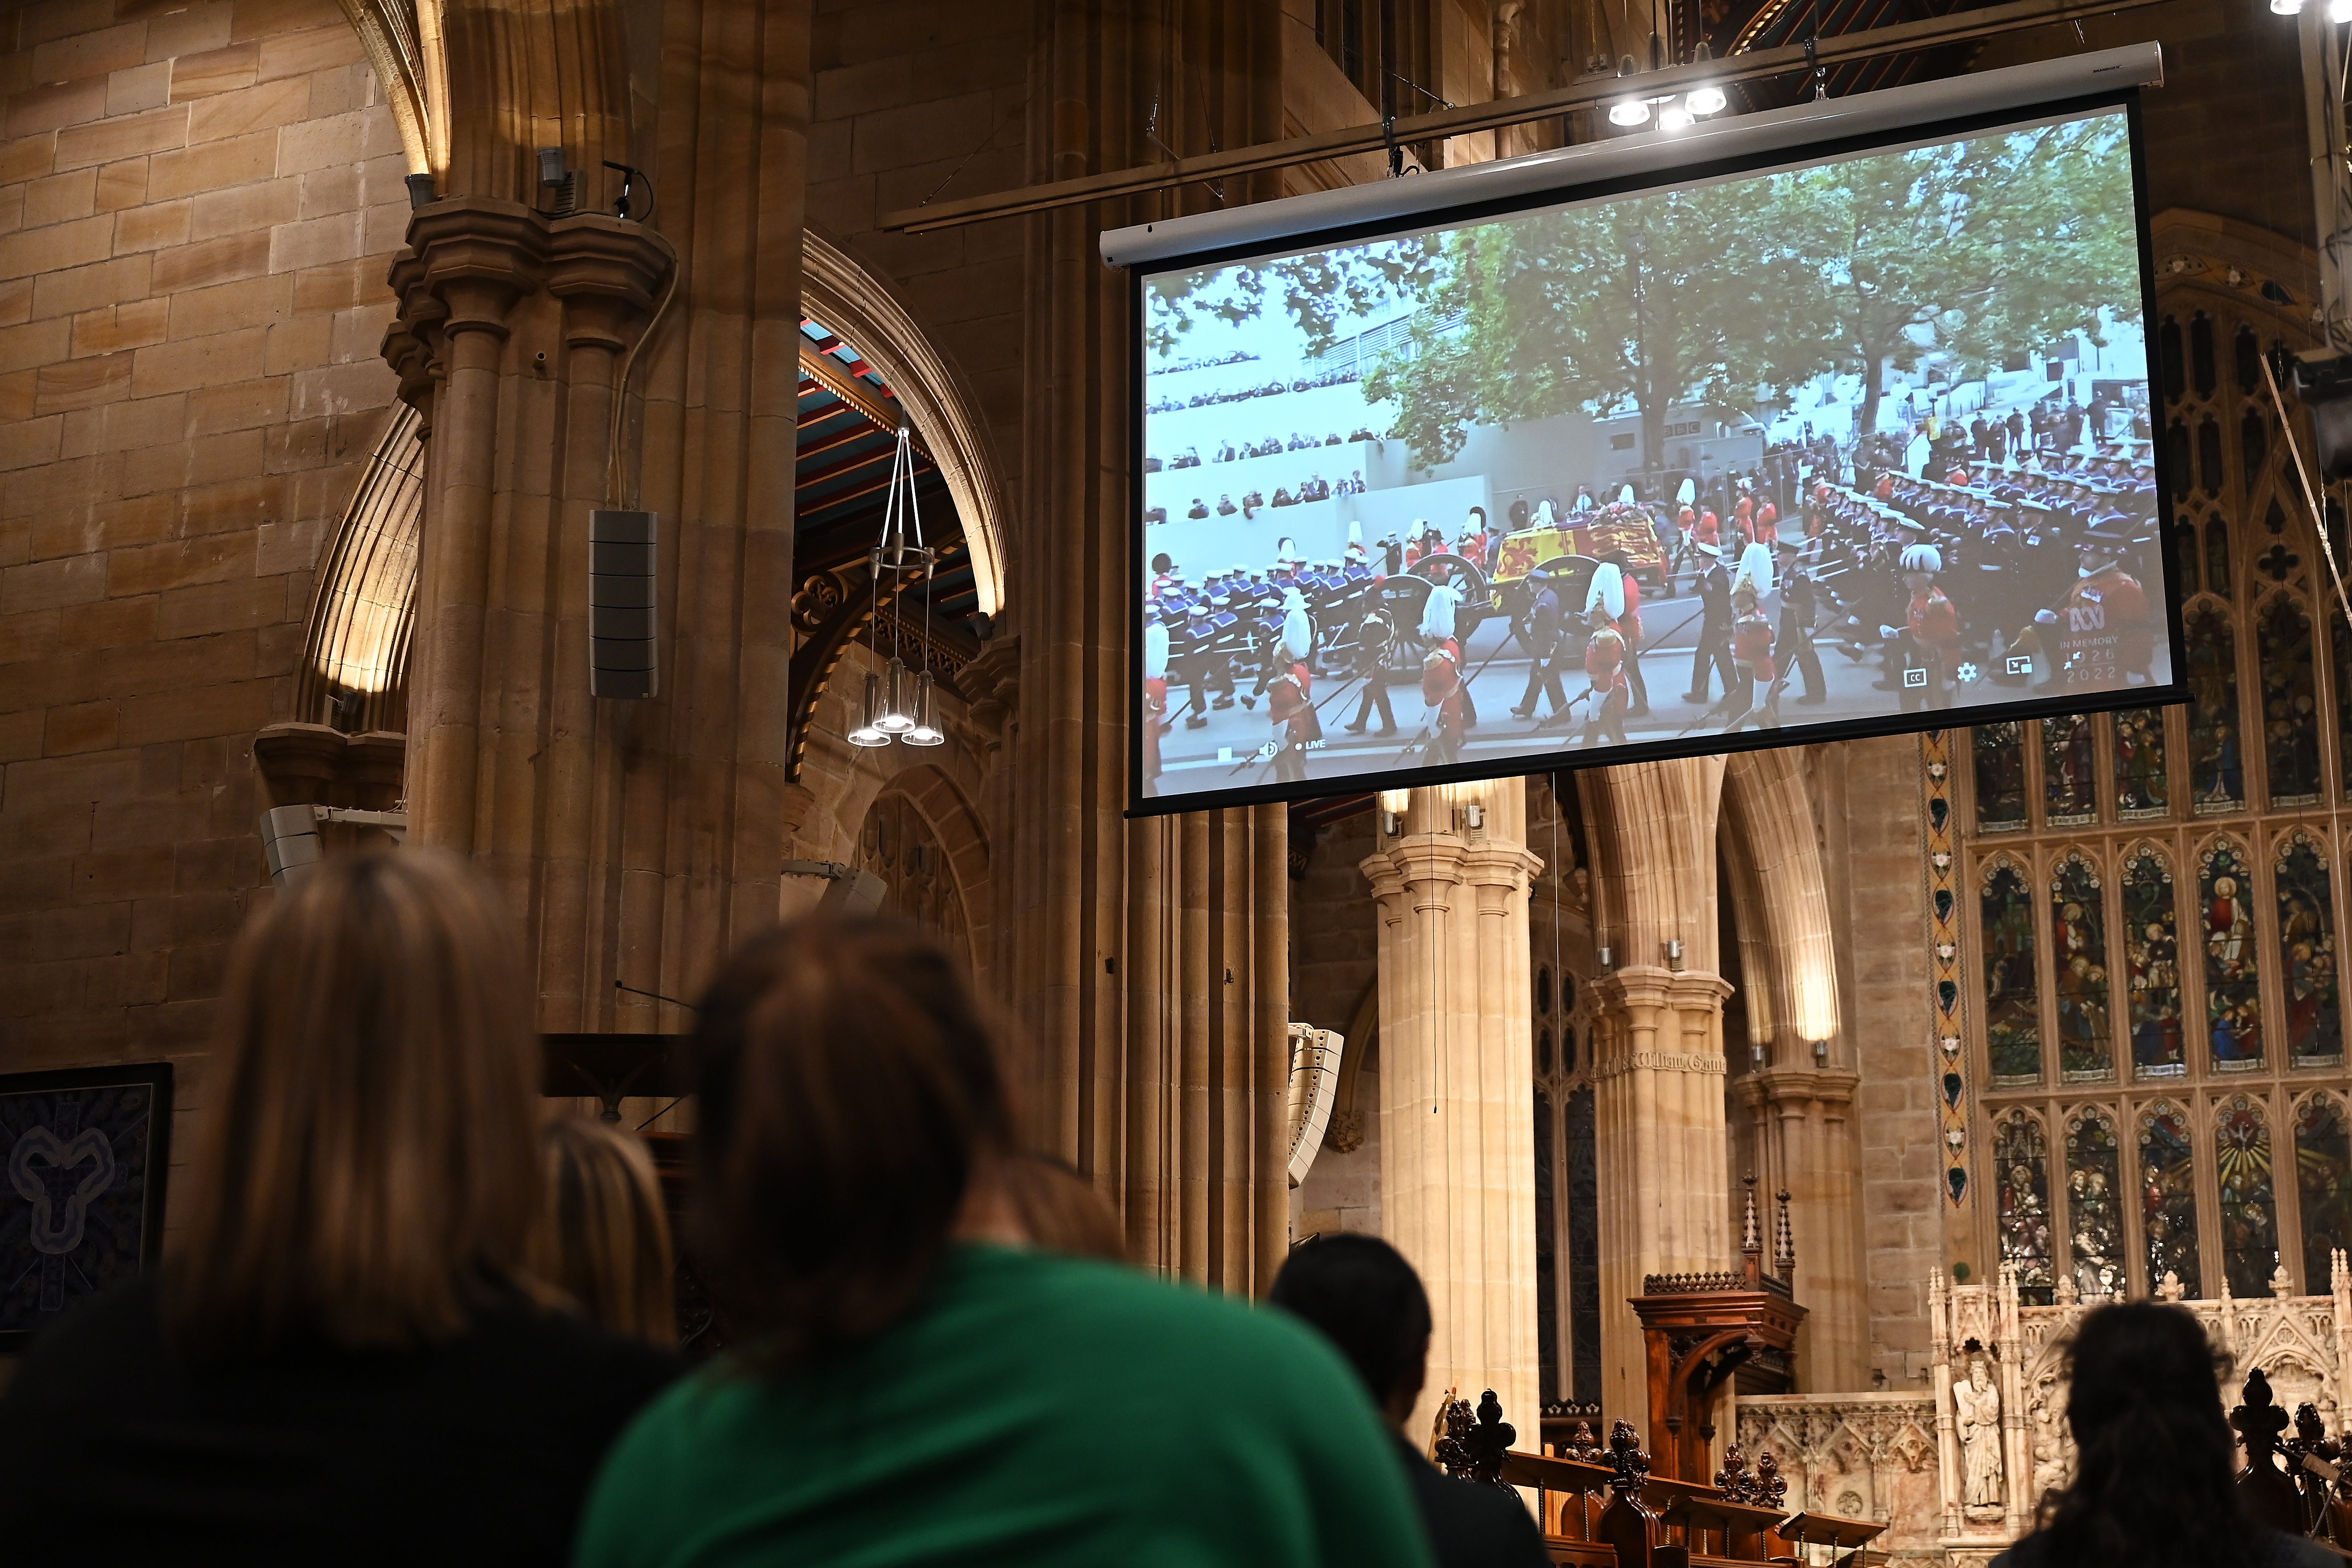 Members of the public watch a live stream of funeral during a Memorial Service at St Andrew's Cathedral in Sydney, Australia